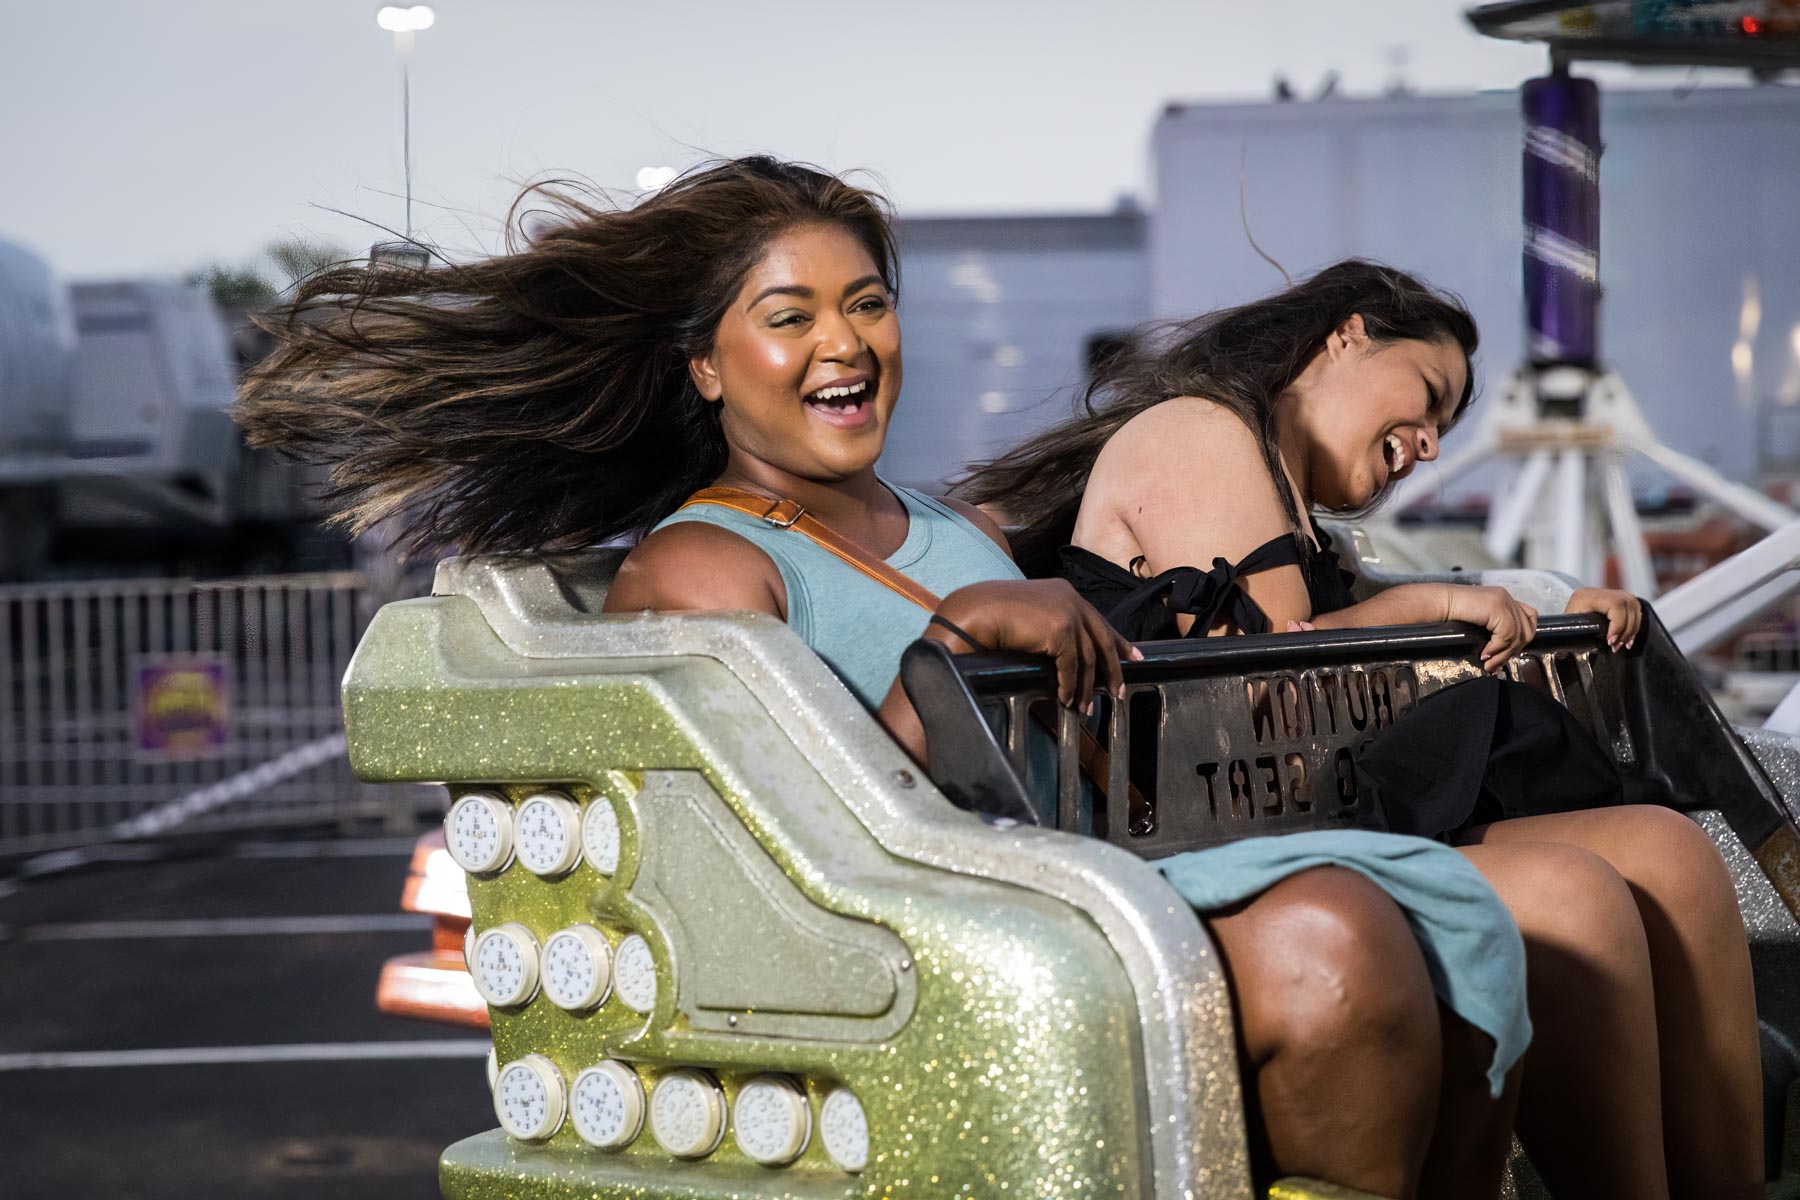 Two girls with hair flying on carnival ride for an article on the best Fiesta photos